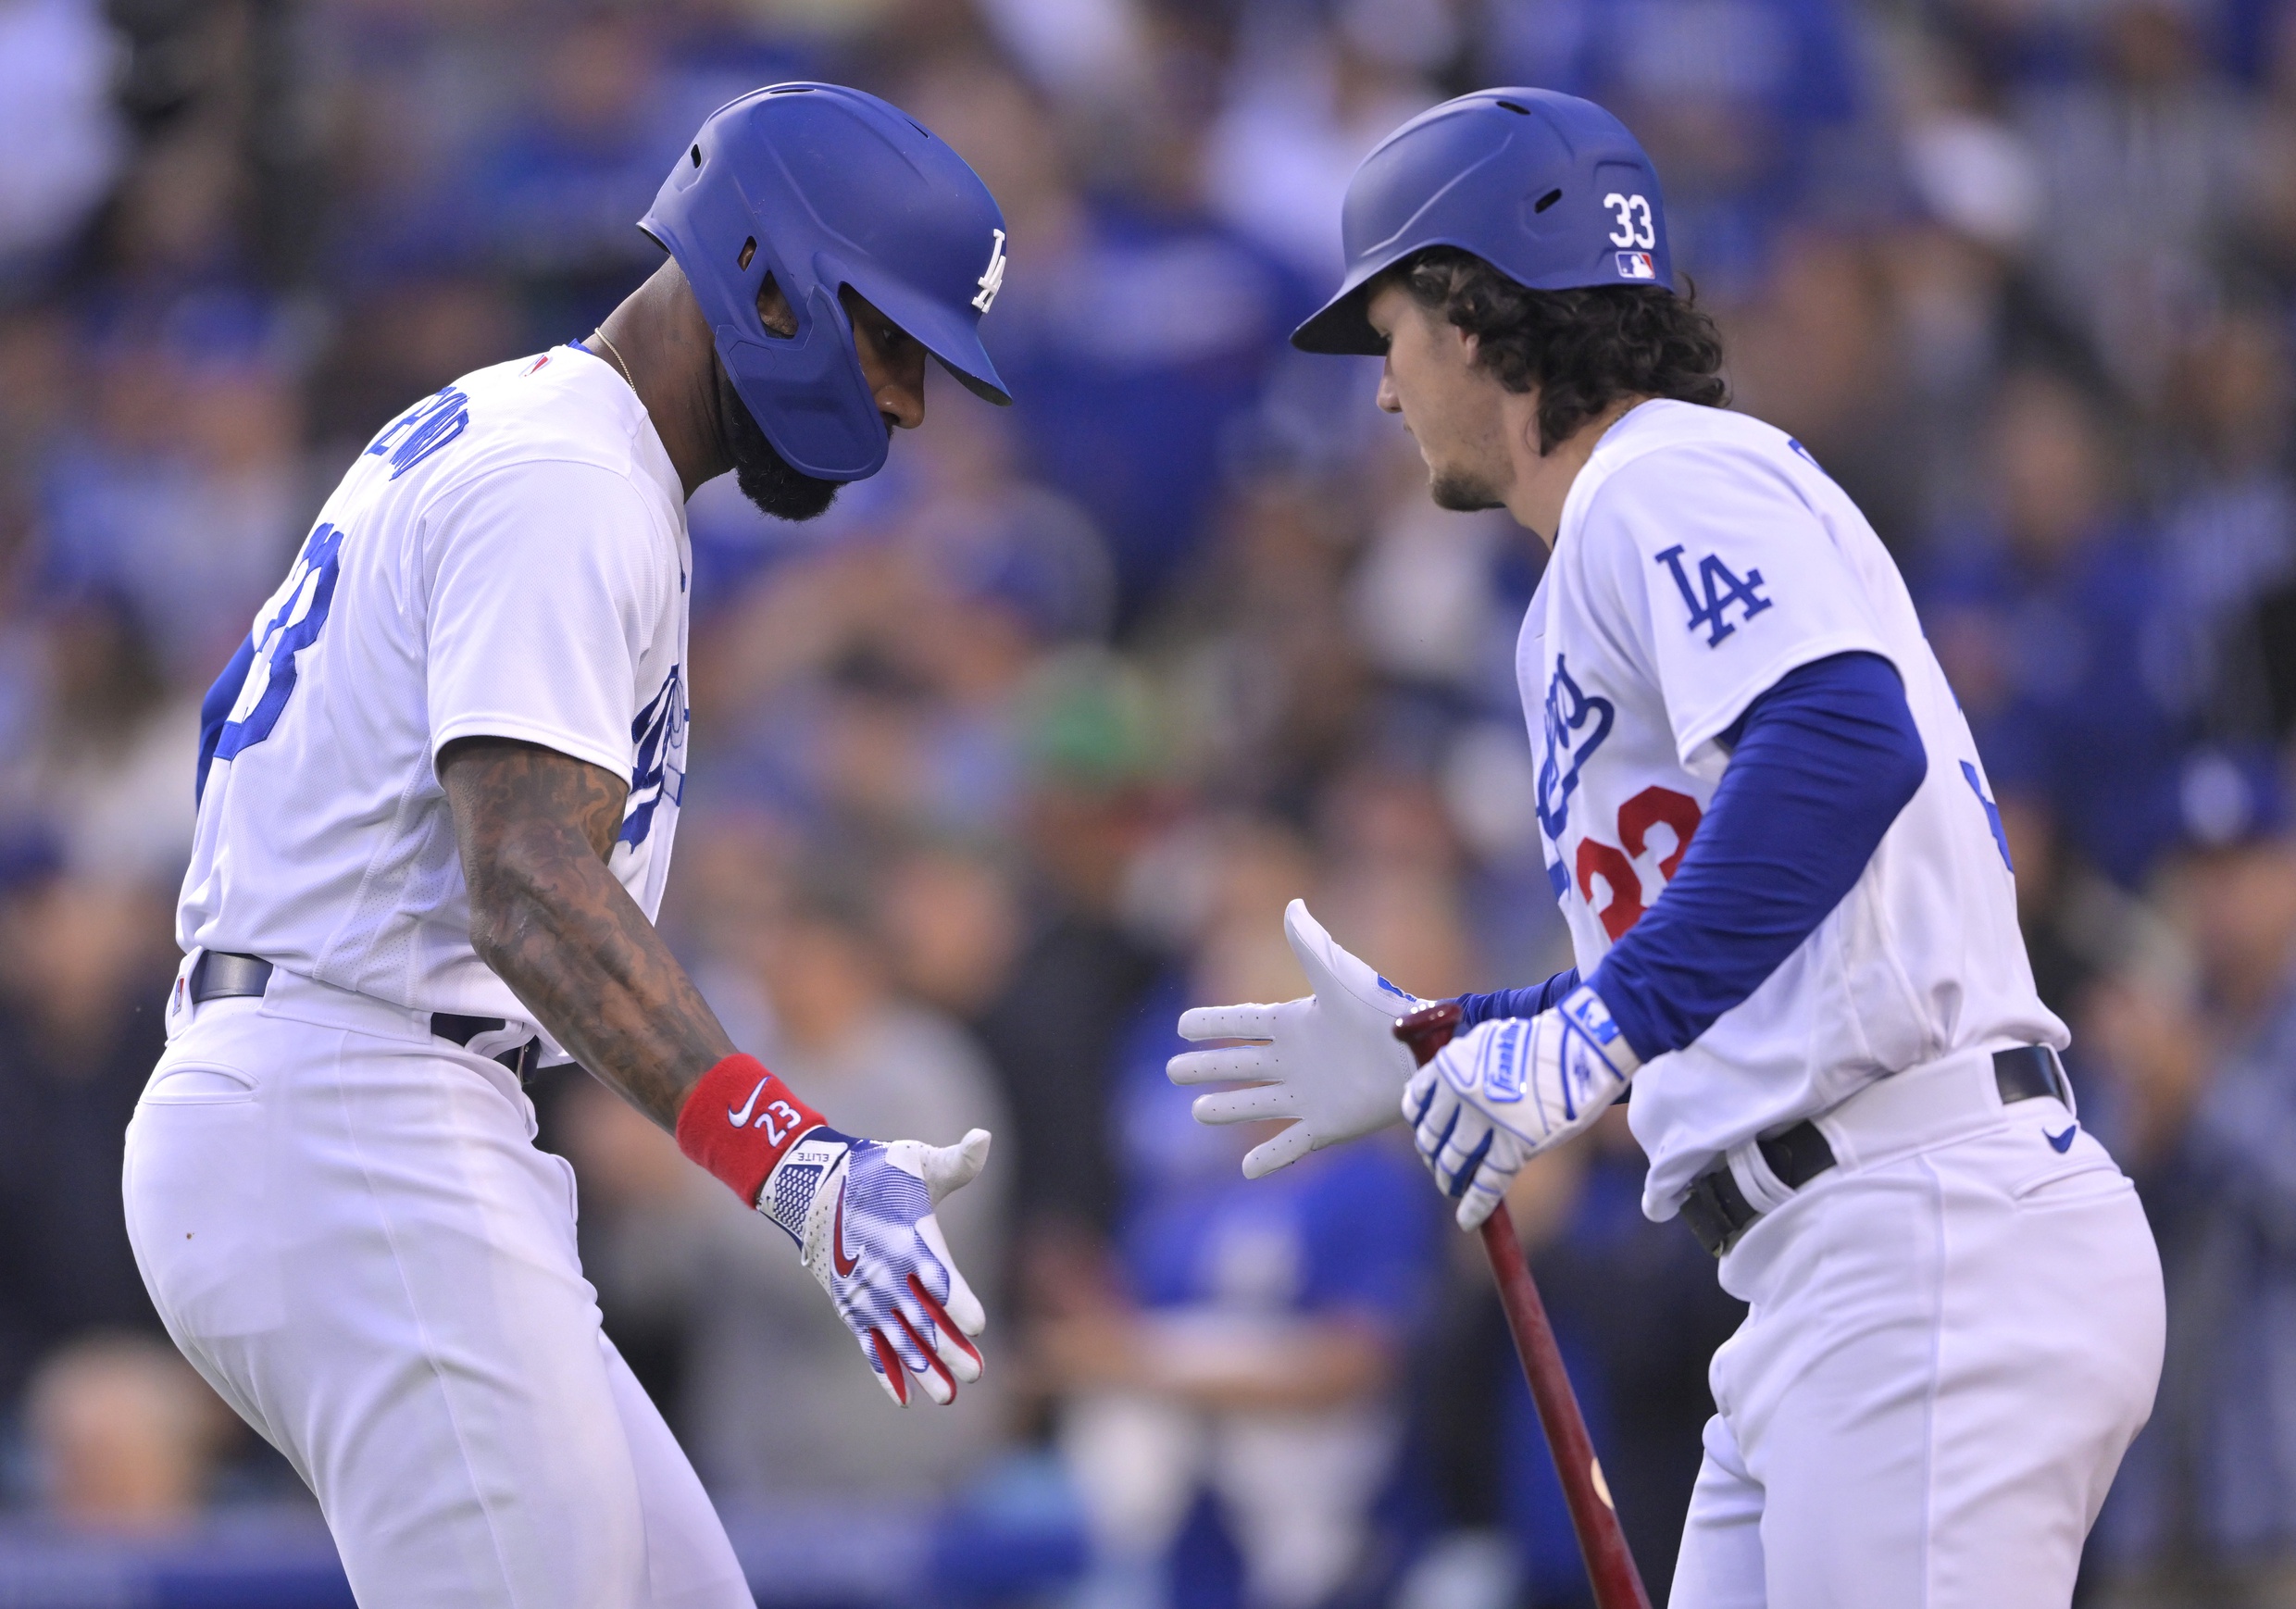 Dodgers Notes Weeks Away From Urias Return Jd Continues Hr Streak Miller S Next Start And More